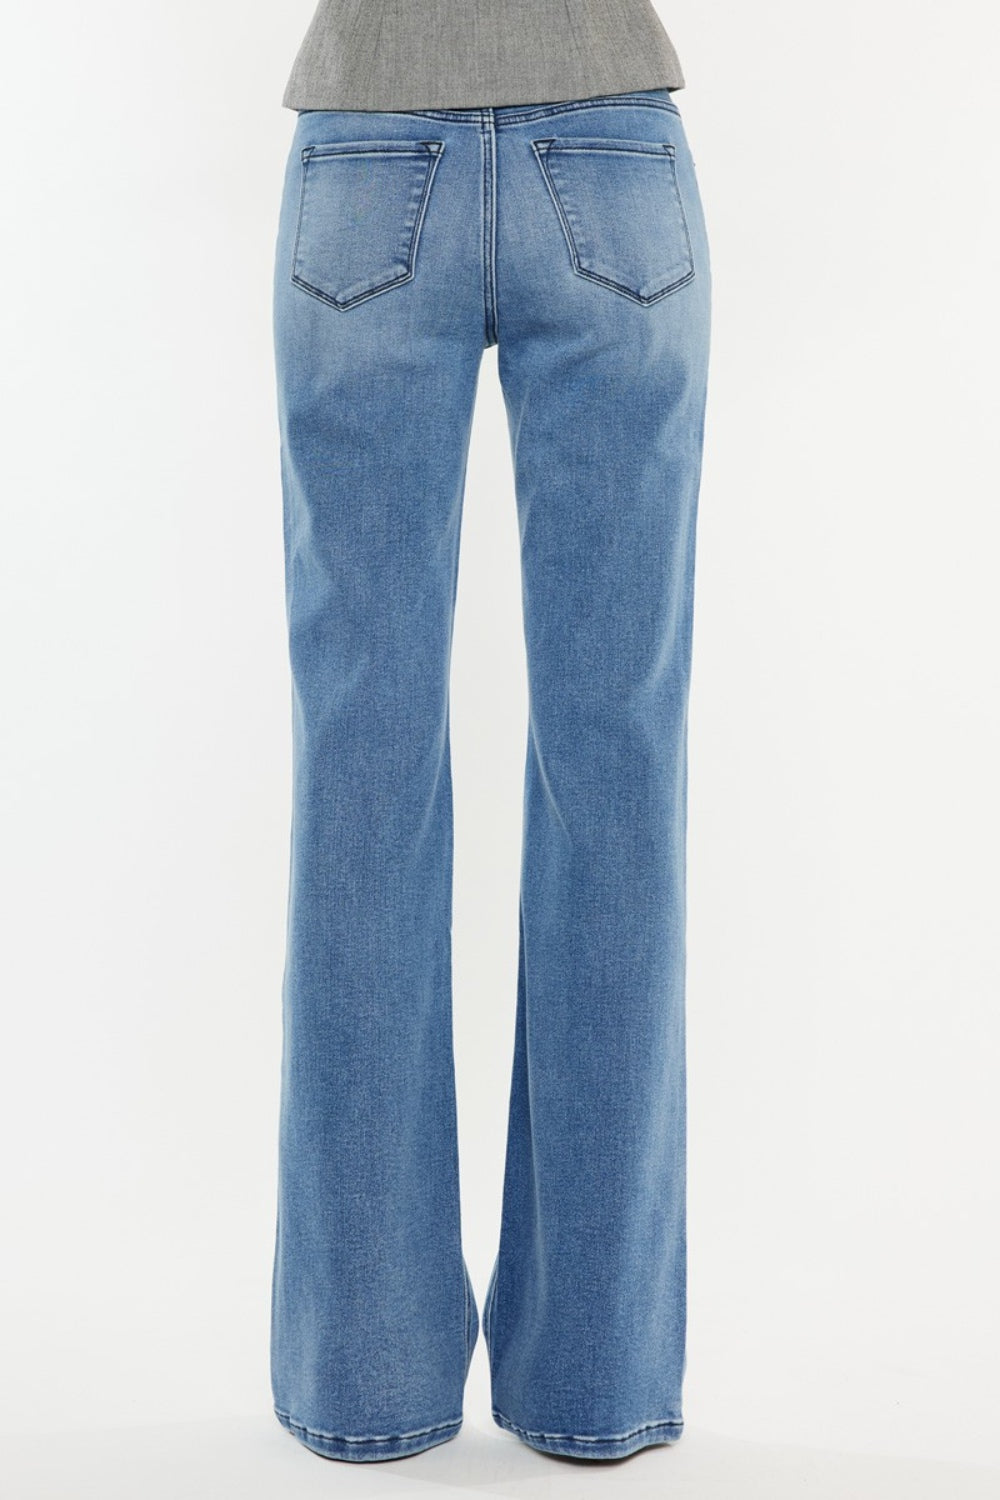 Ultra High Rise Cat's Whiskers Jeans